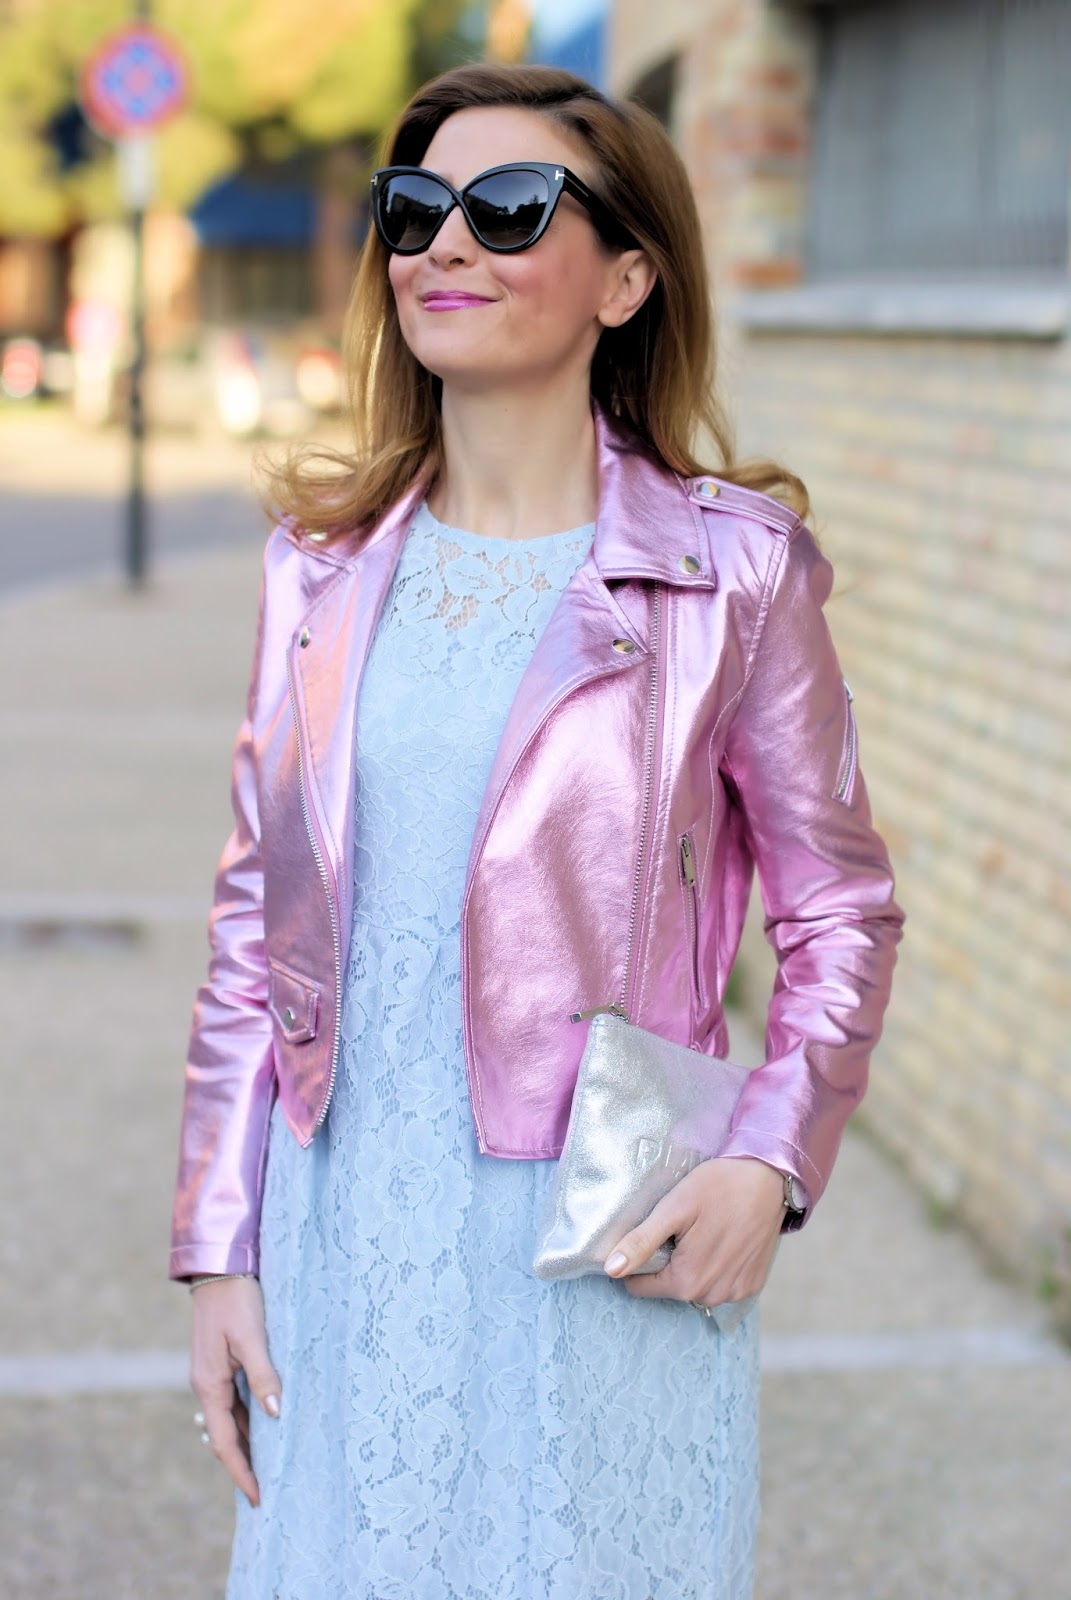 Lace dress and metallic pink motorbike jacket, SmartBuyGlasses Tom Ford sunglasses on Fashion and Cookies fashion blog, fashion blogger style